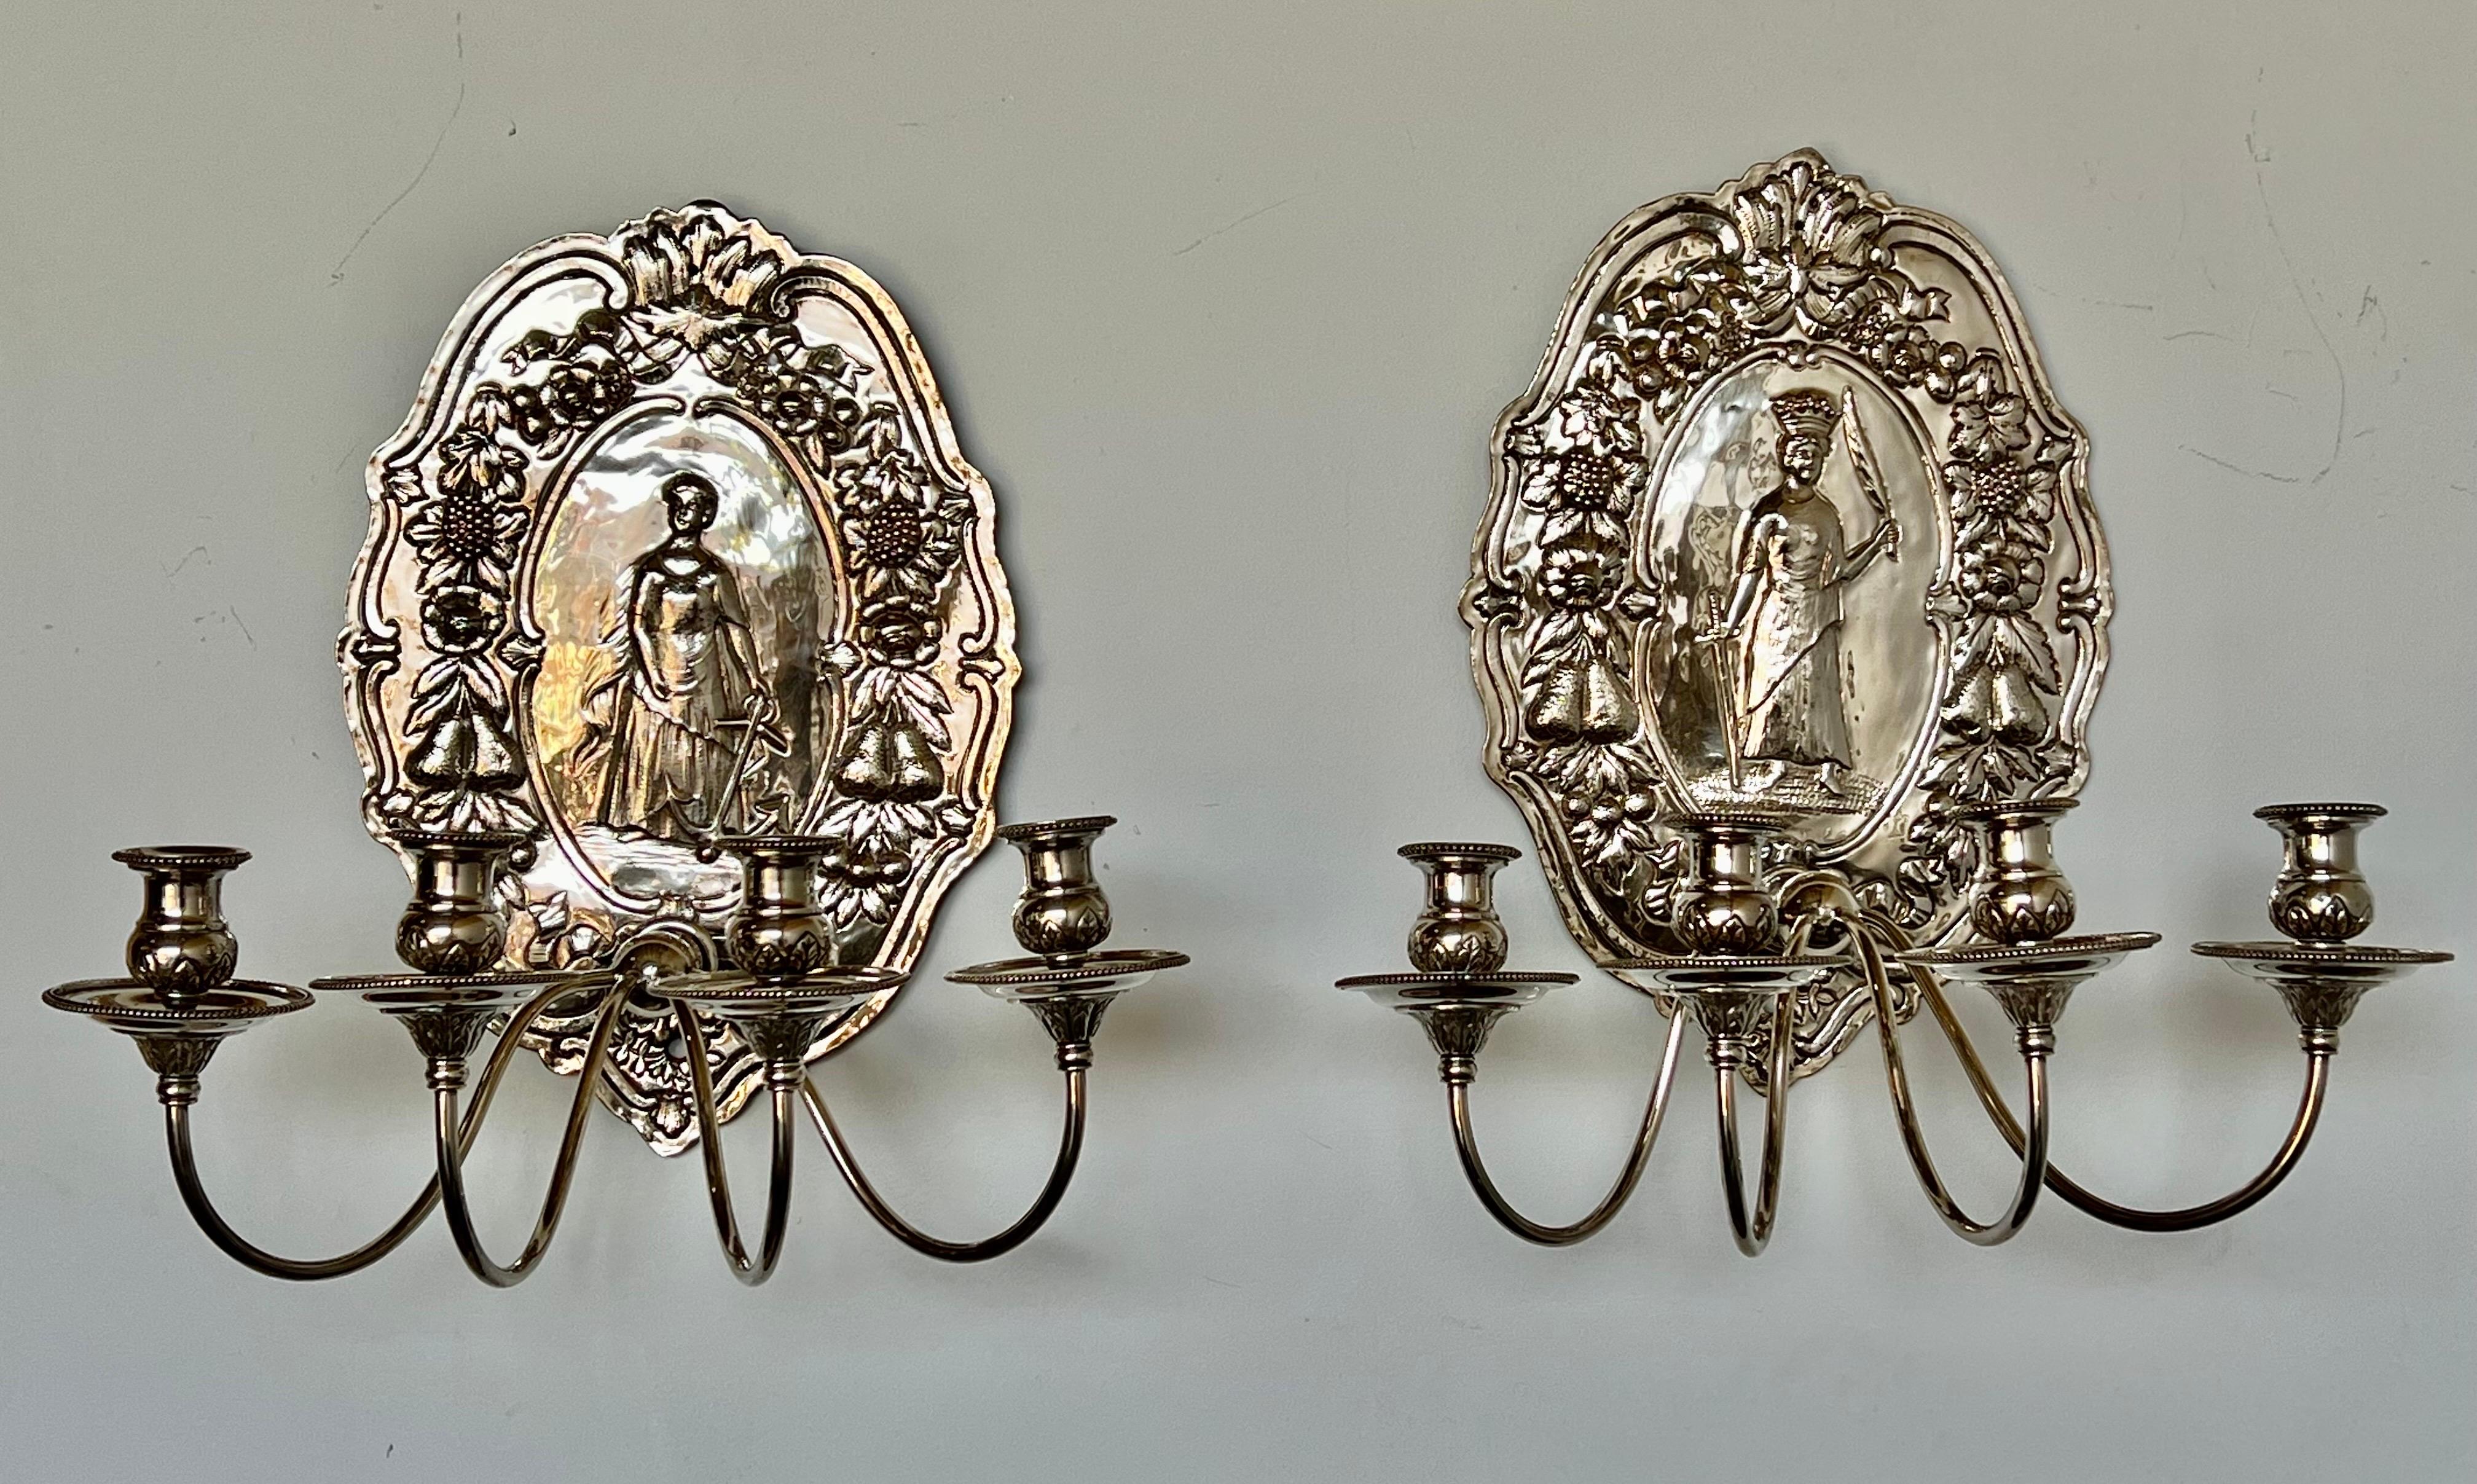 Pair of 19th C. English handmade silver plated candle sconces. The 4-light sconces are all hand hammered. They are decorated with a figure of a crowned man with swords and a detailed woman holding an anchor. The sconces are also decorated with